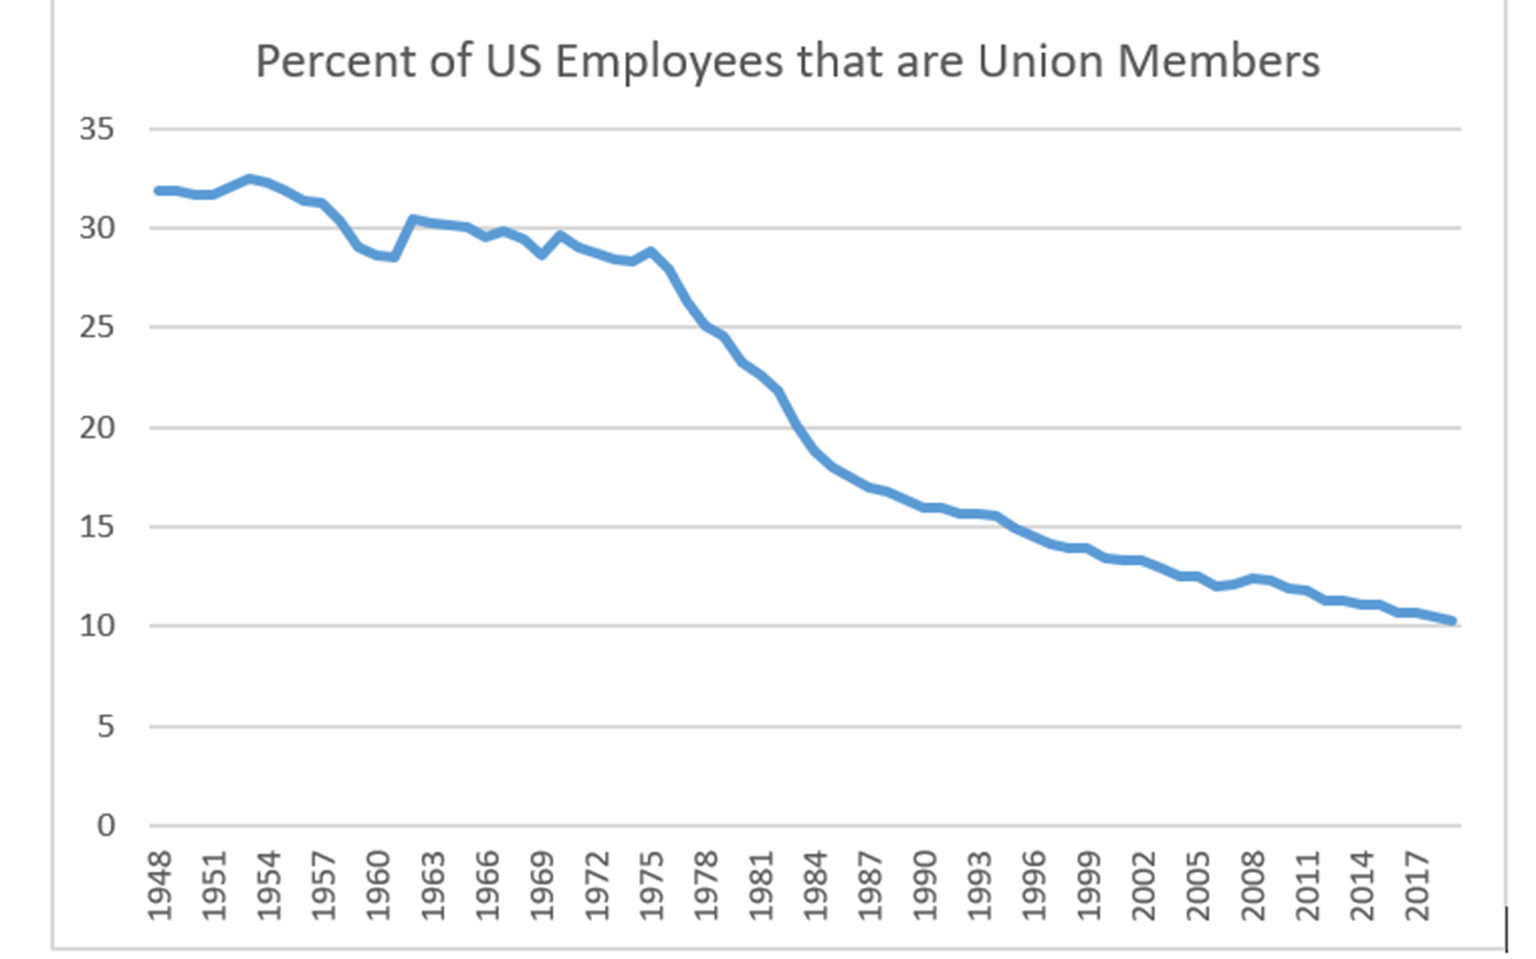 Chart showing that the number of US employees that are Union members is in decline over the past few decades